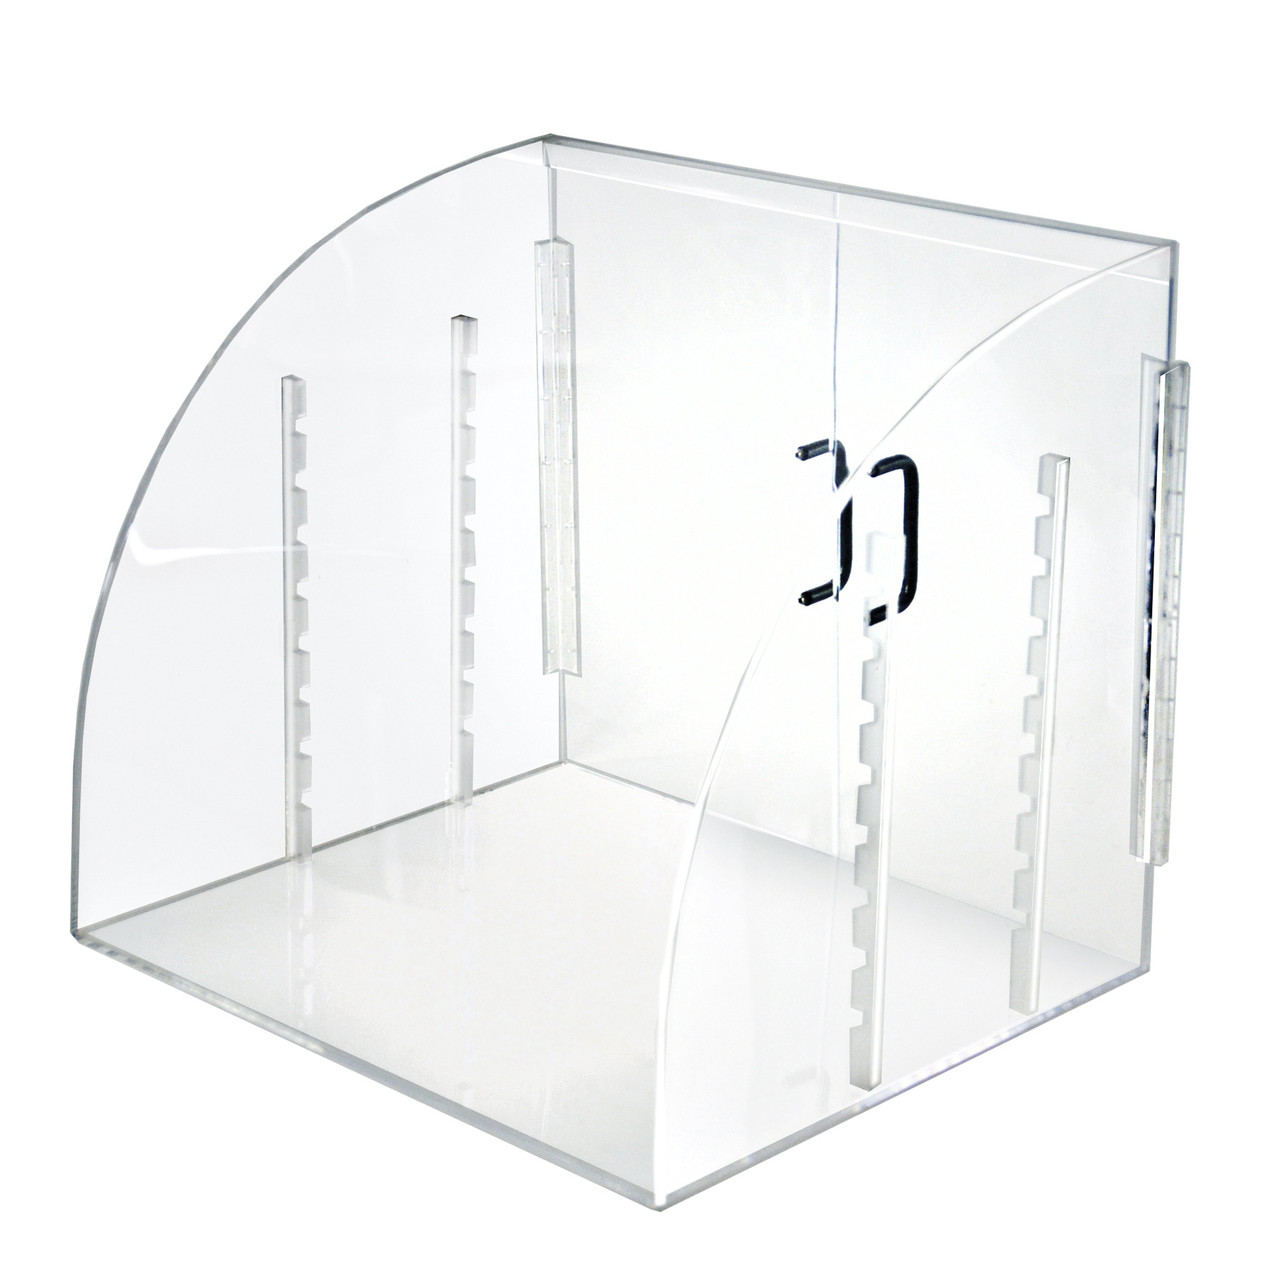 CLOSEOUT: Acrylic Food Display Case with Front and Back Spring-Hinged ...